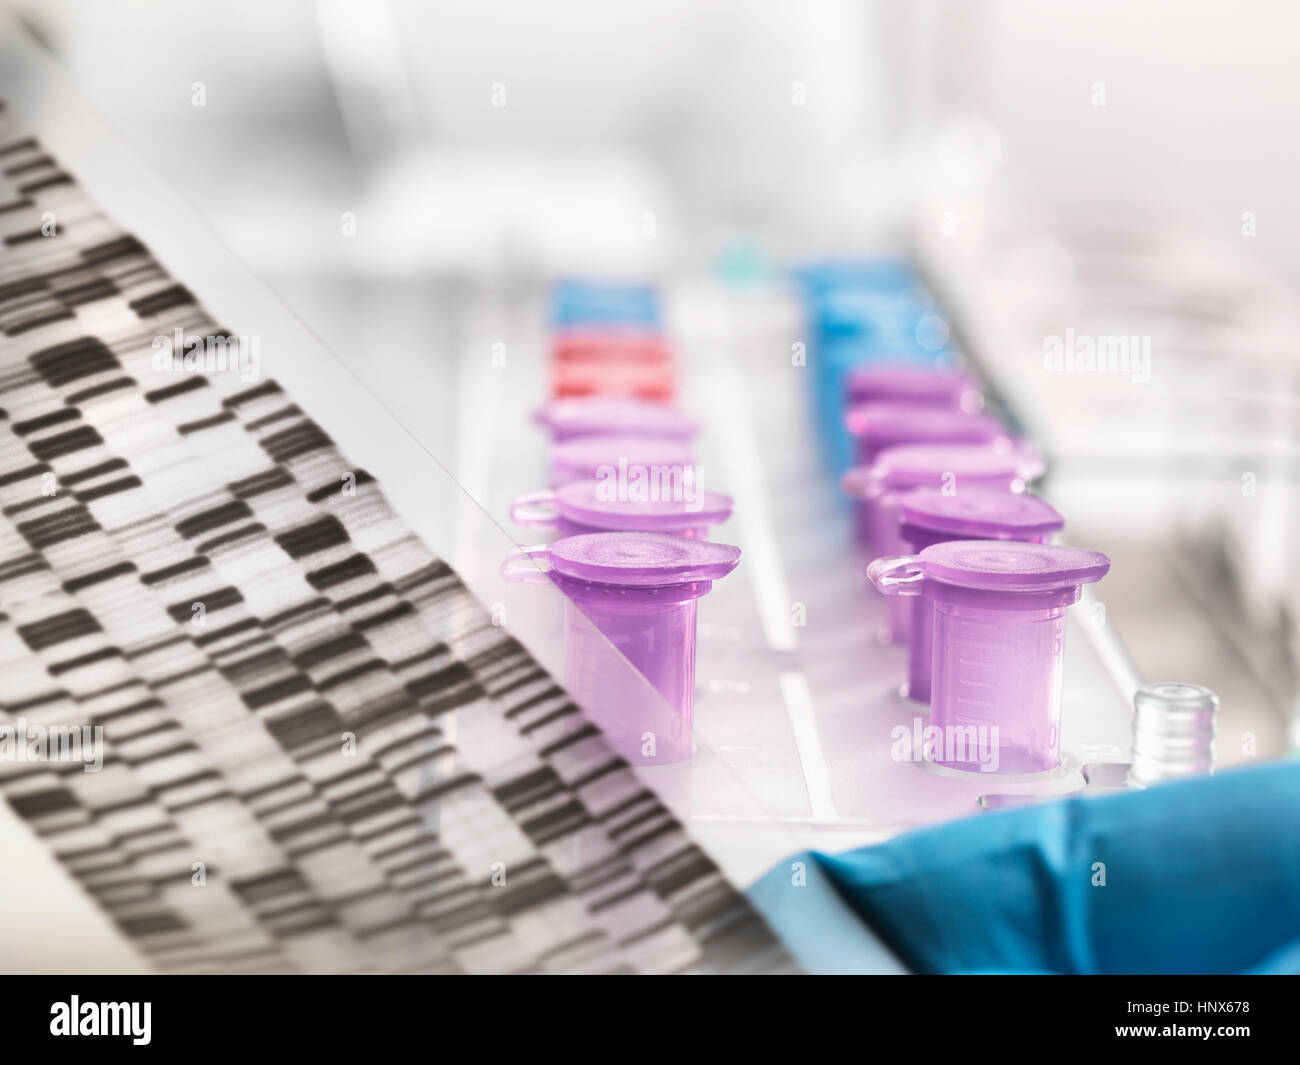 Scientist holding a DNA autoradiogram gel showing genetic information with samples in tray Stock Photo